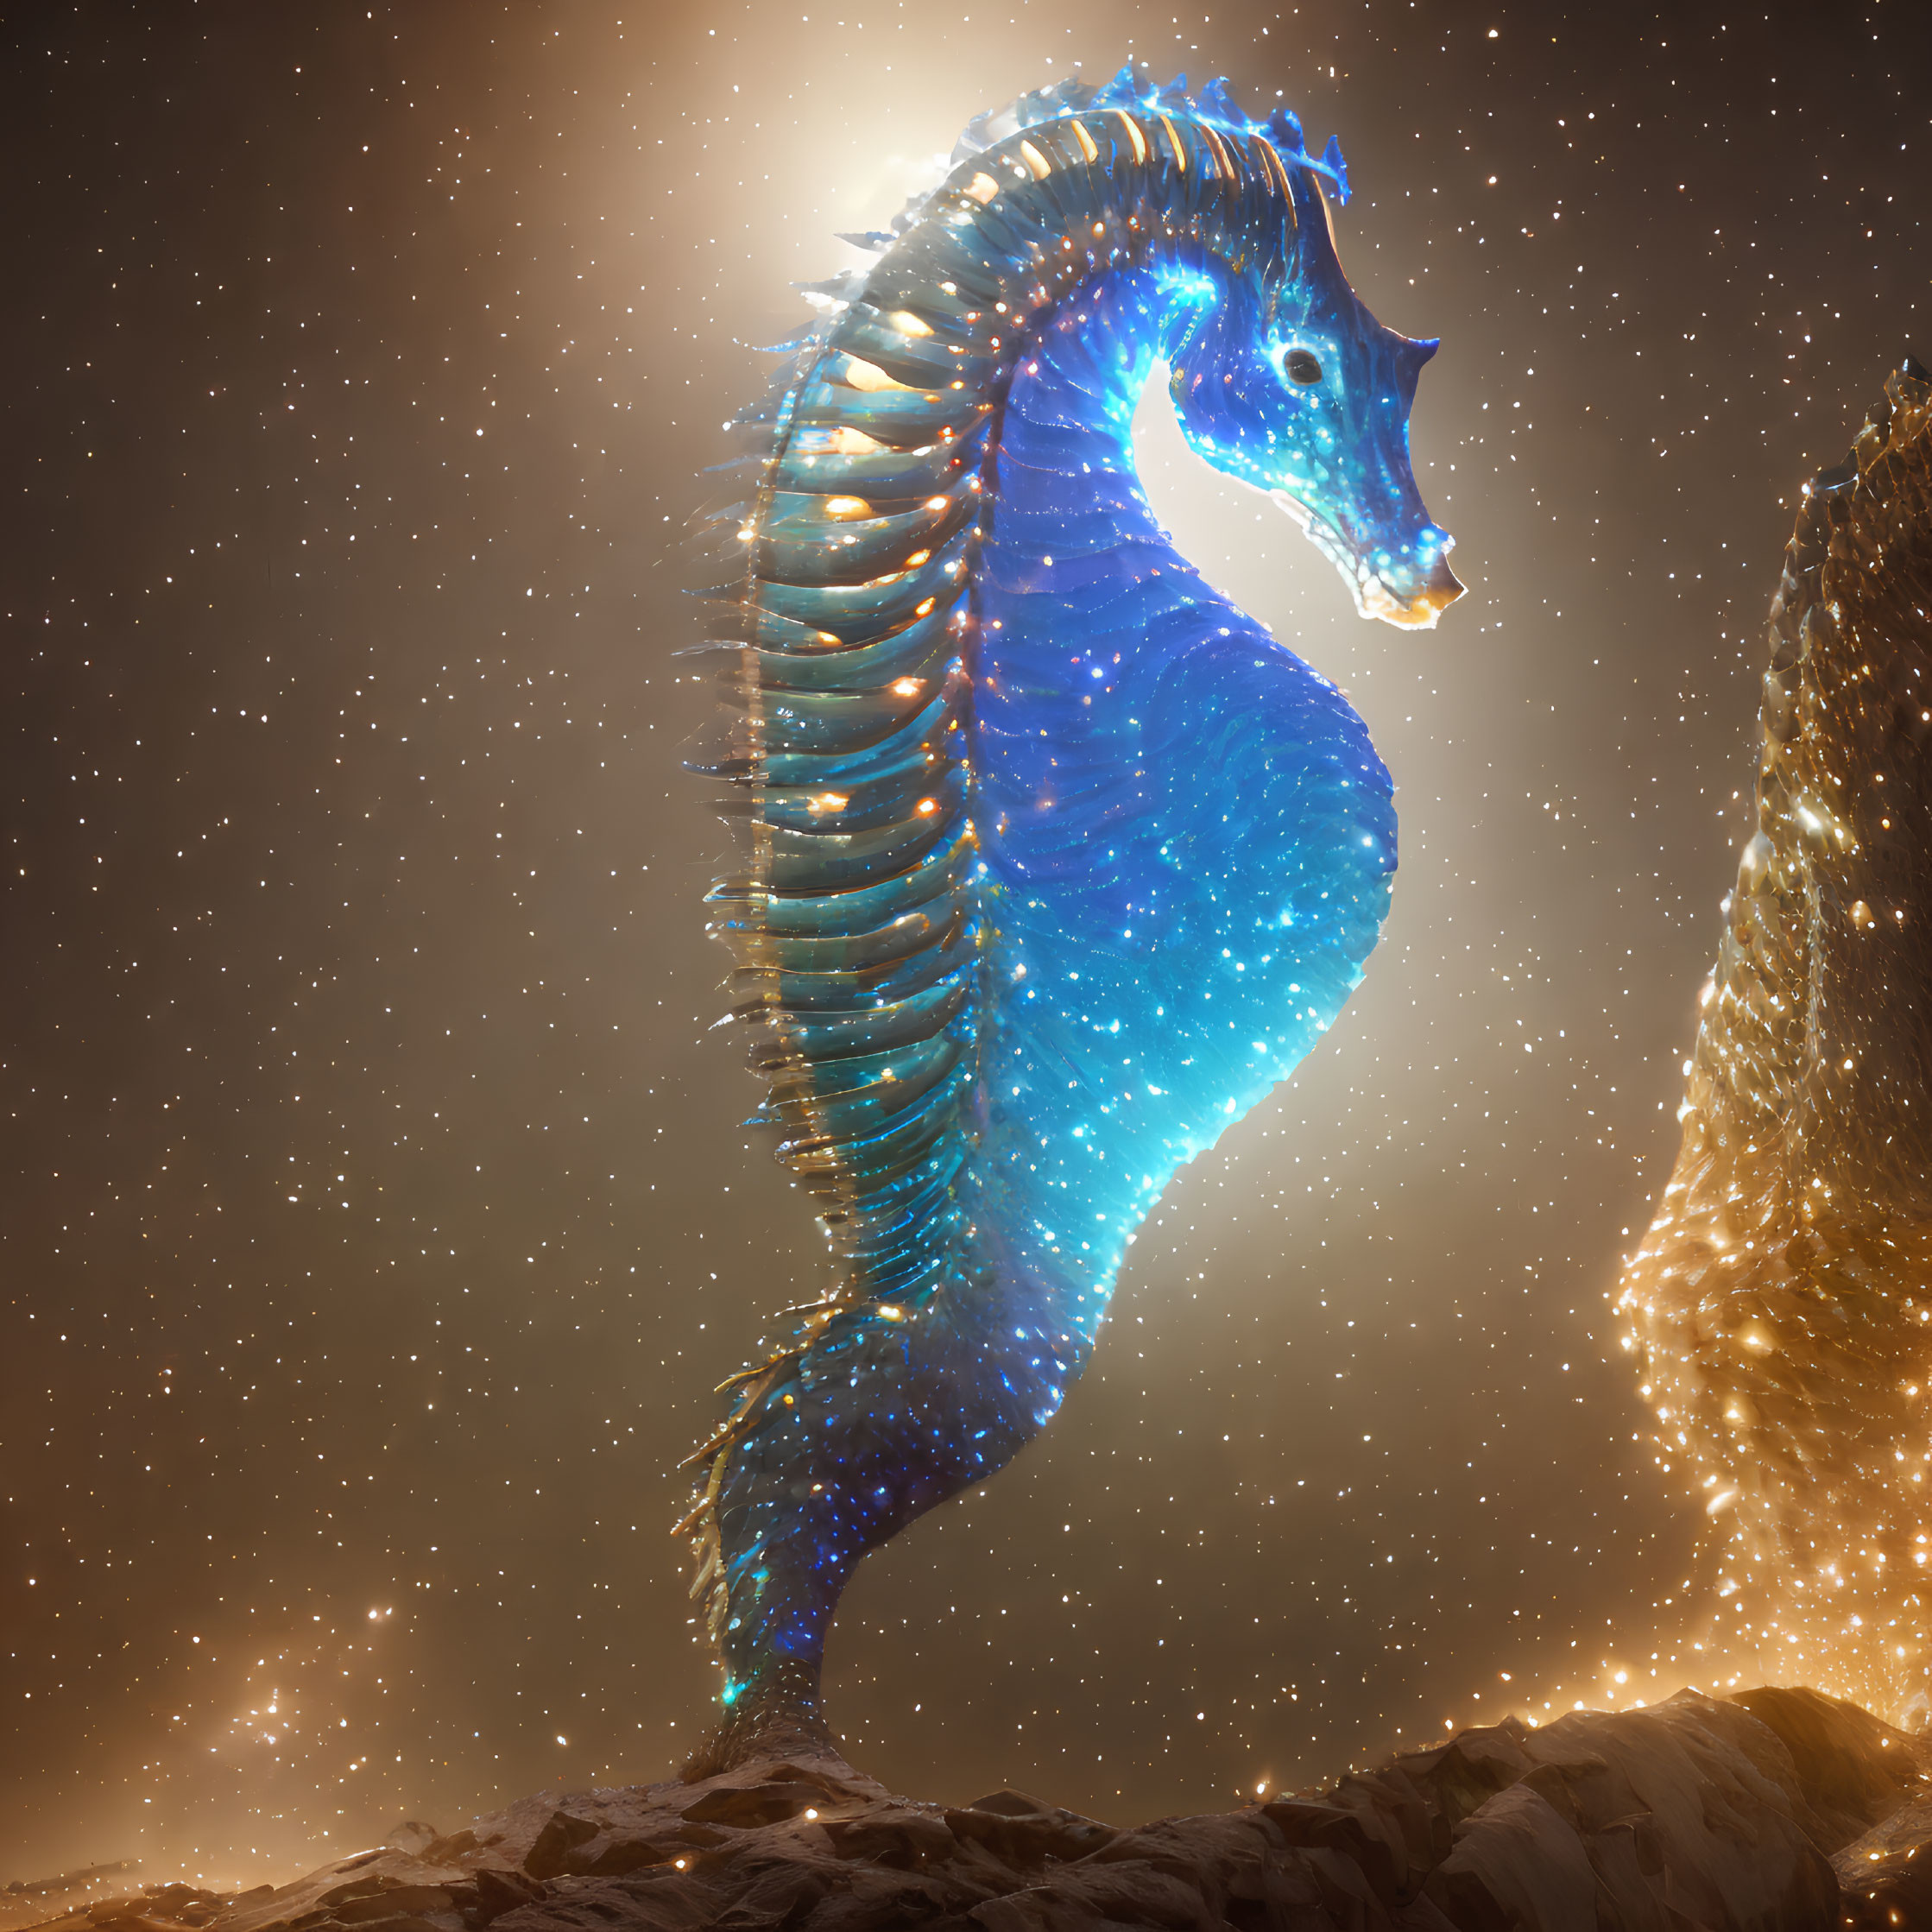 Majestic cosmic seahorse with star-filled body and glowing fins